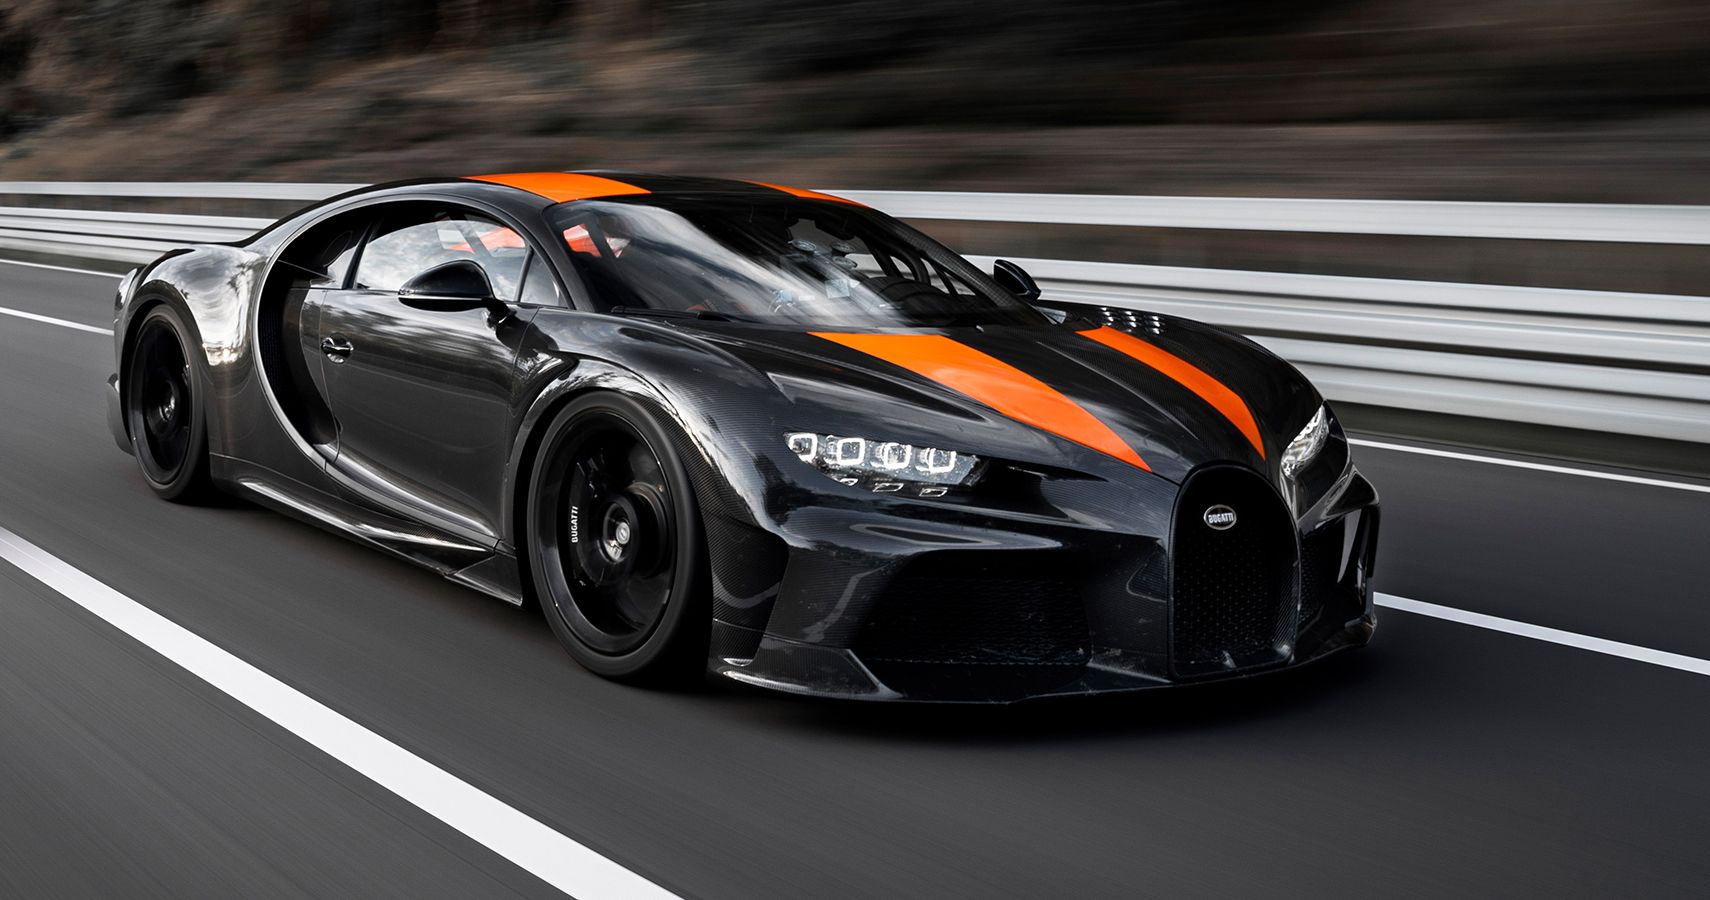 How much is the Bugatti Chiron 2023?